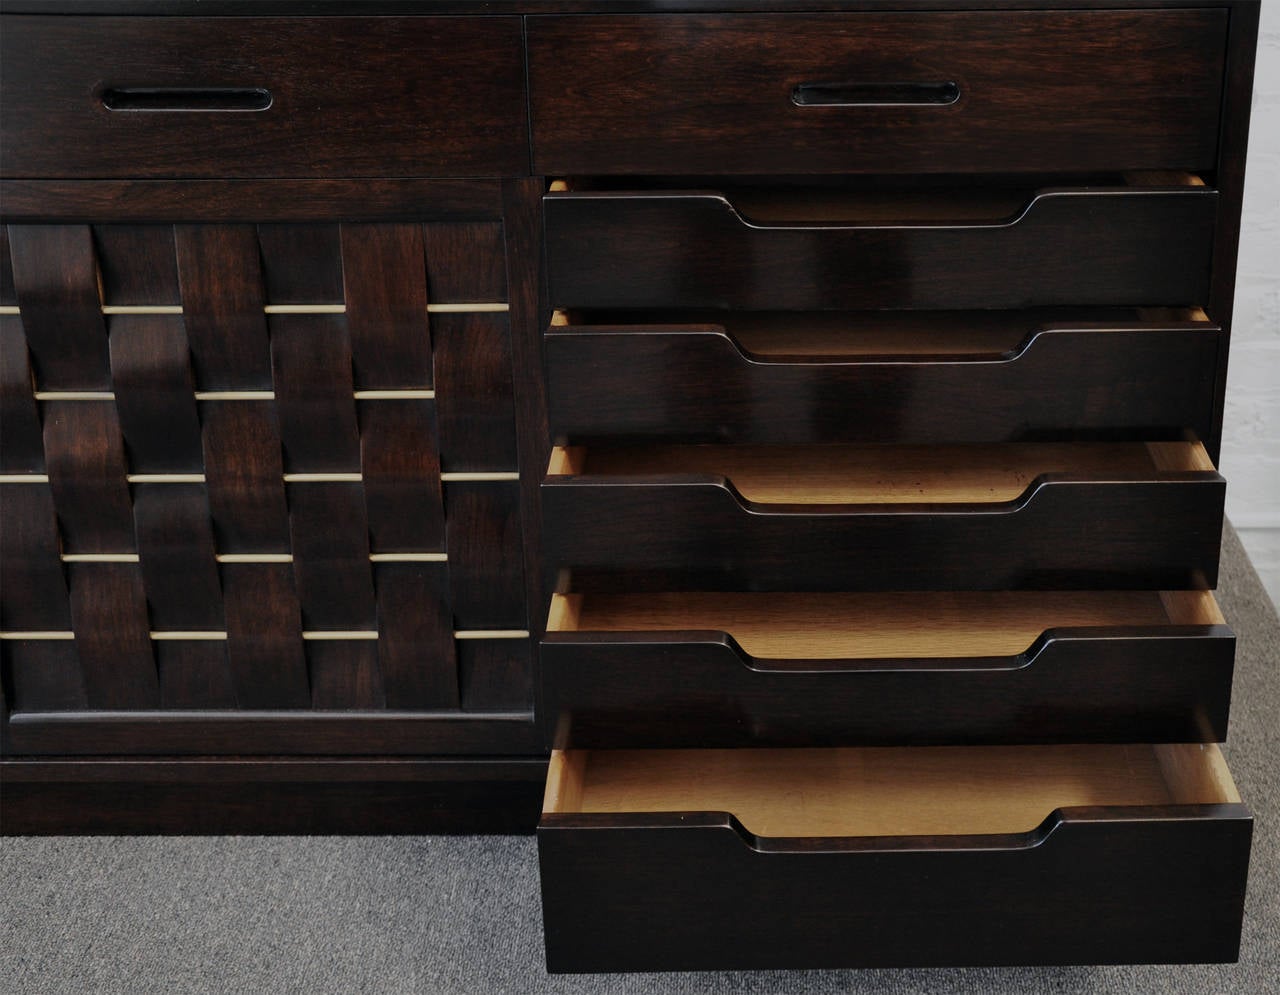 Large sideboard designed by Edward Wormley for Dunbar Furniture Company, Berne, Indiana. Dark walnut case with beautiful original hand rubbed finish. Four top drawers have recessed handle grips. Four sliding doors of laminated walnut veneer